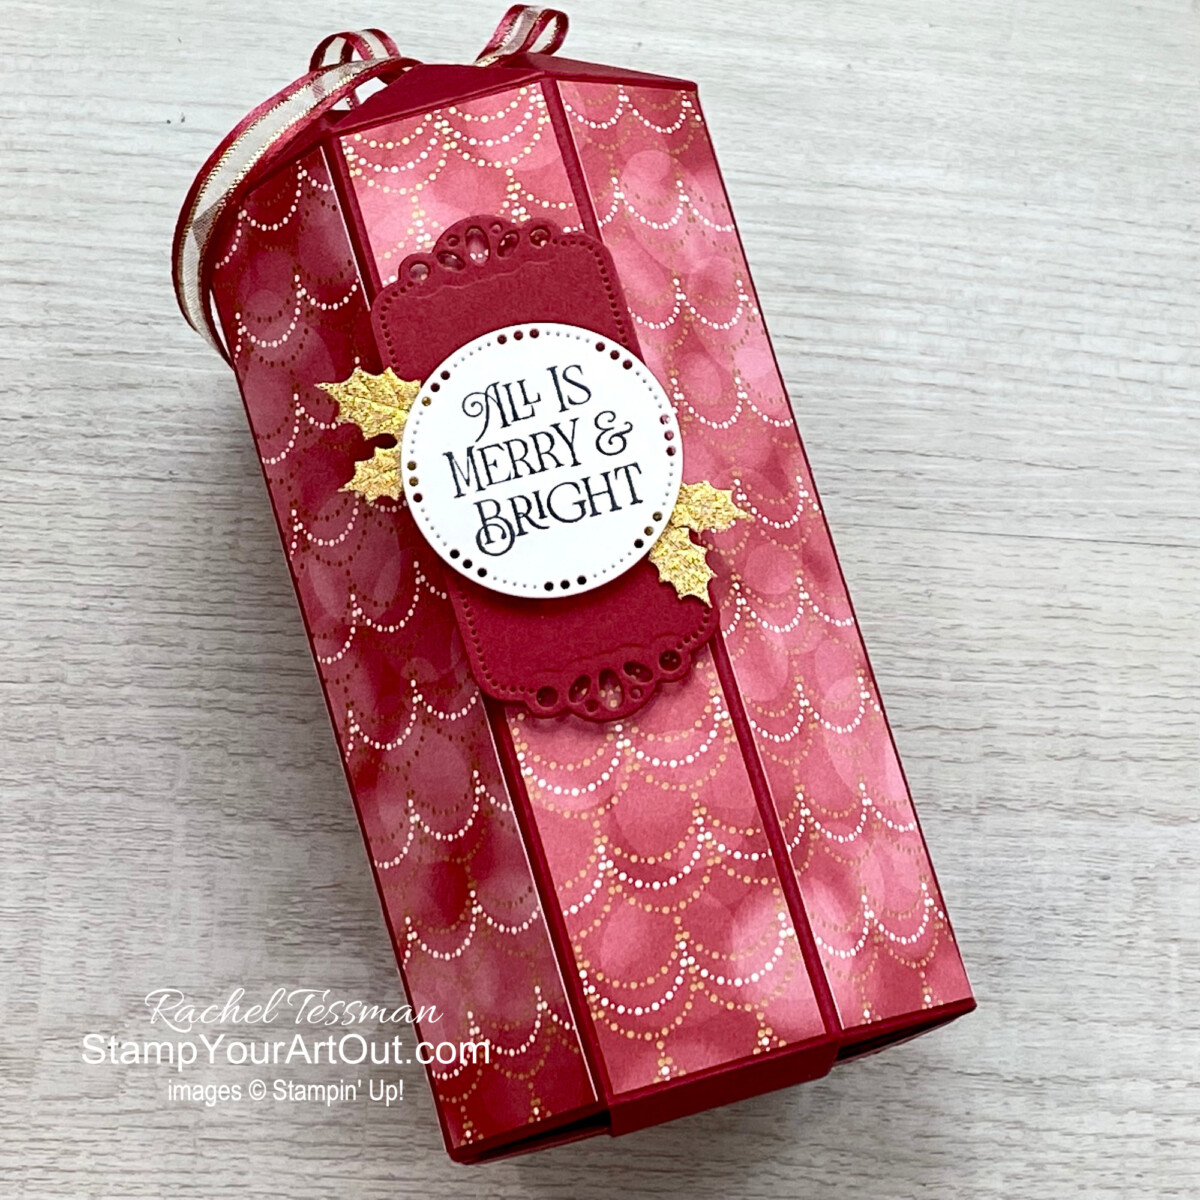 Learn how to make two sizes of the Octagon Star Boxes. Visit my 11/9/22 blog post to see the larger ones I created with beautiful current products from Stampin’ Up!®: Brightest Glow & Celebrating You stamp sets, Labels Aglow dies, and Lights Aglow and Texture Chic designer papers. You’ll be able to access measurements, a how-to video with tips and tricks, other close-up photos, and links to all the products I used. - Stampin’ Up!® - Stamp Your Art Out! www.stampyourartout.com